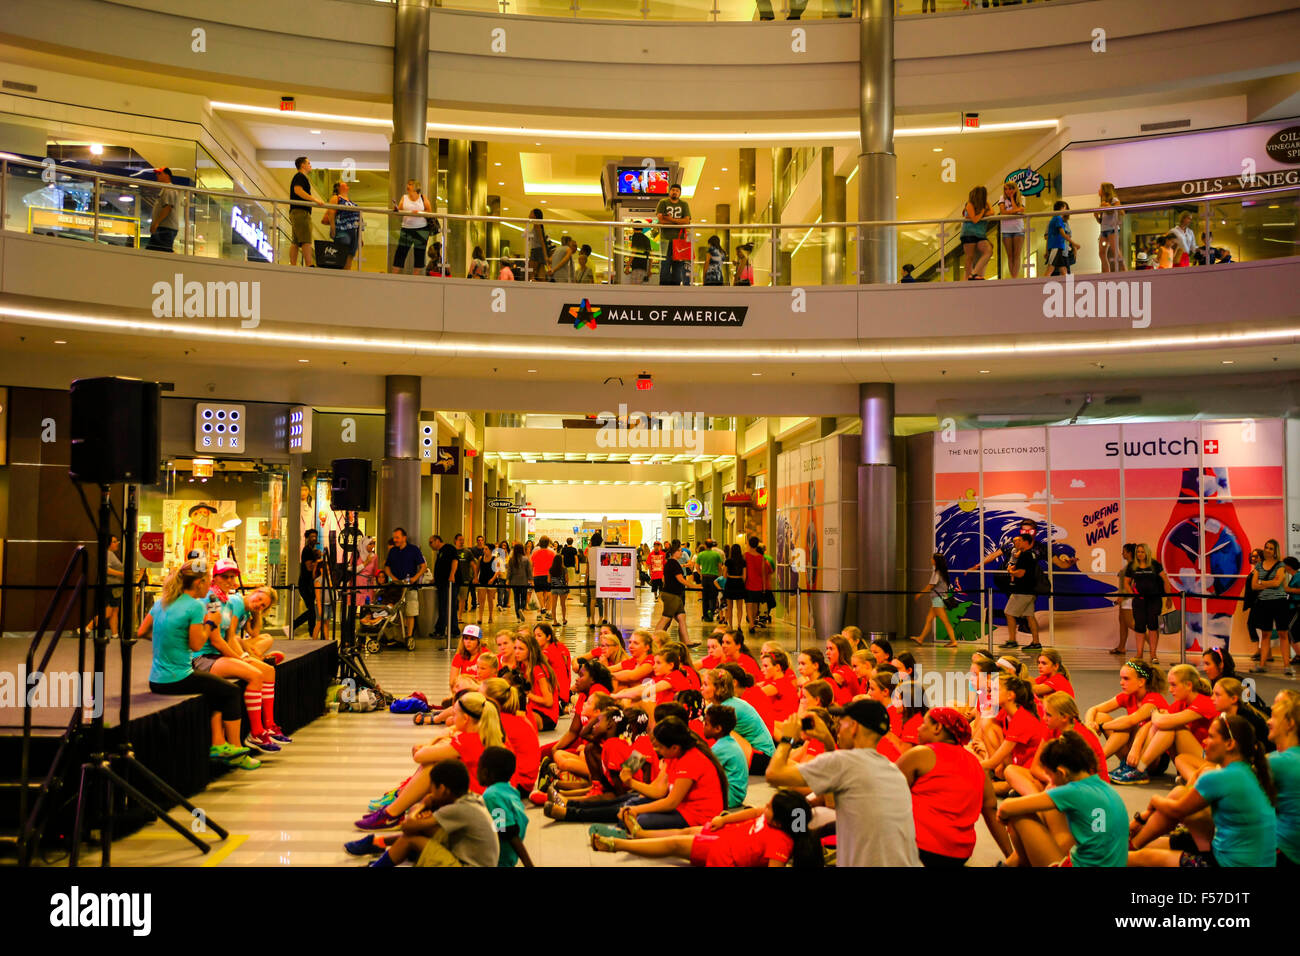 Inside the biggest shopping mall in America - Mall of America in Minneapolis MN Stock Photo